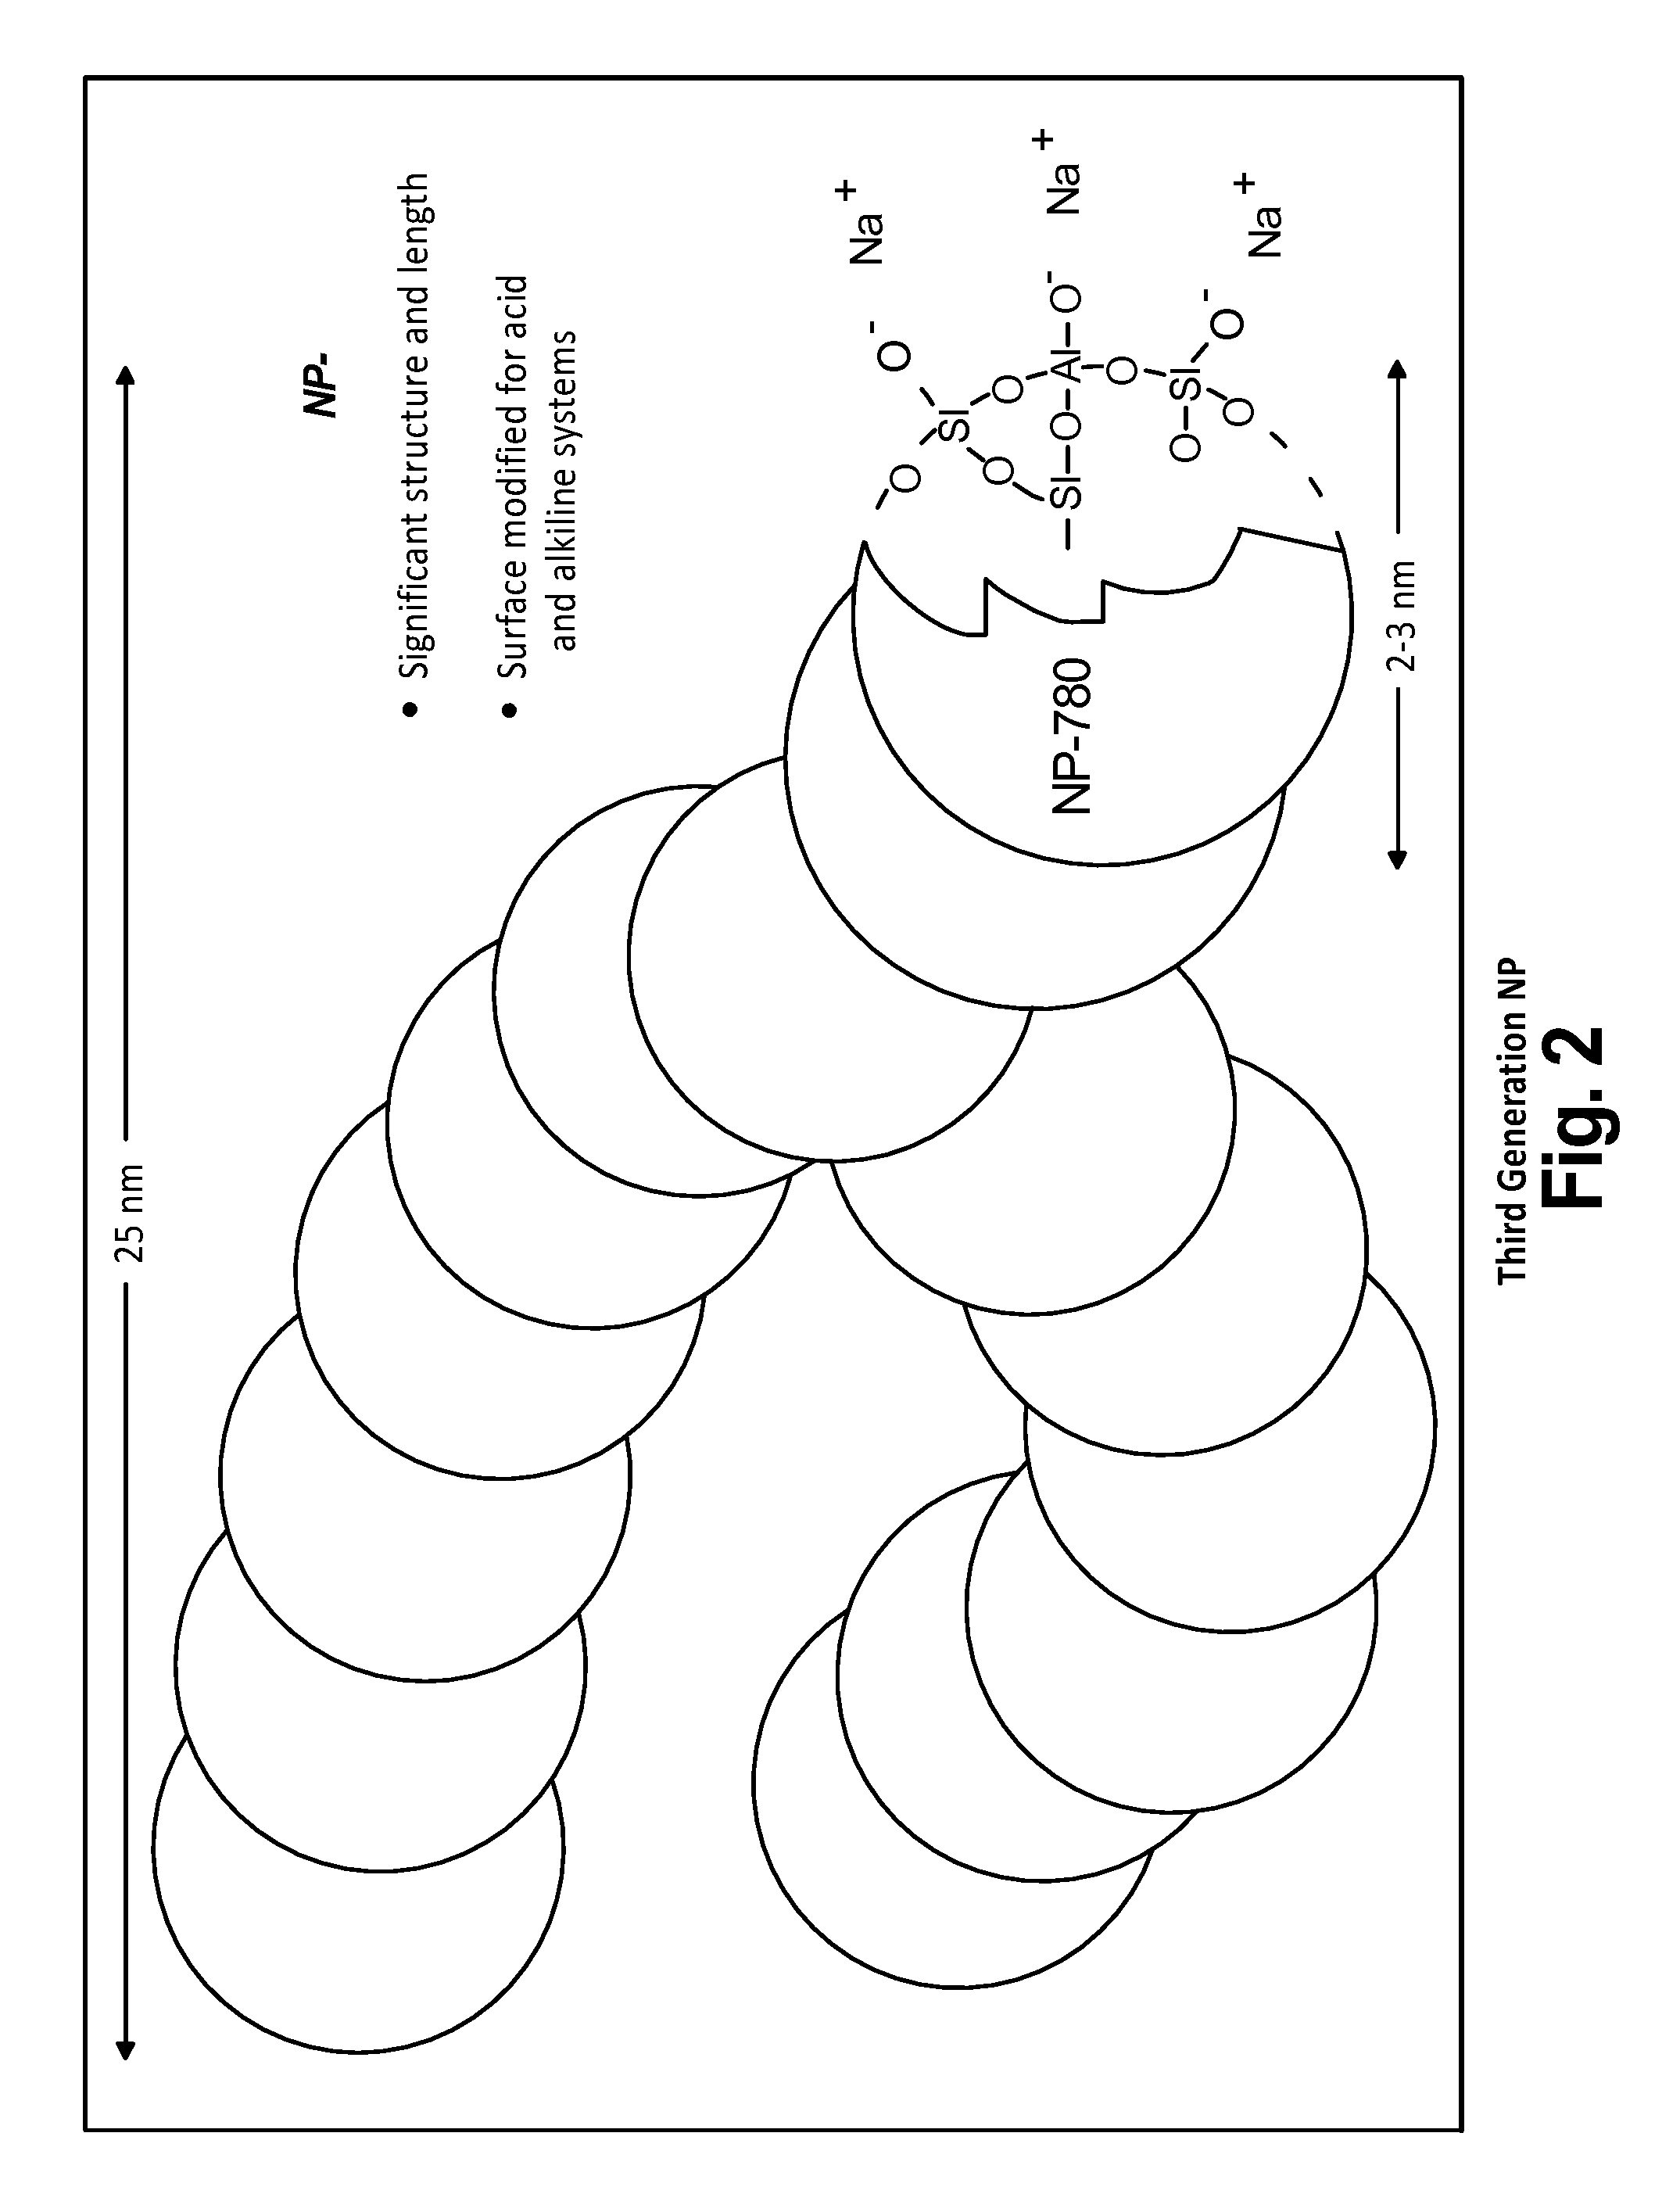 Process for improving optical properties of paper